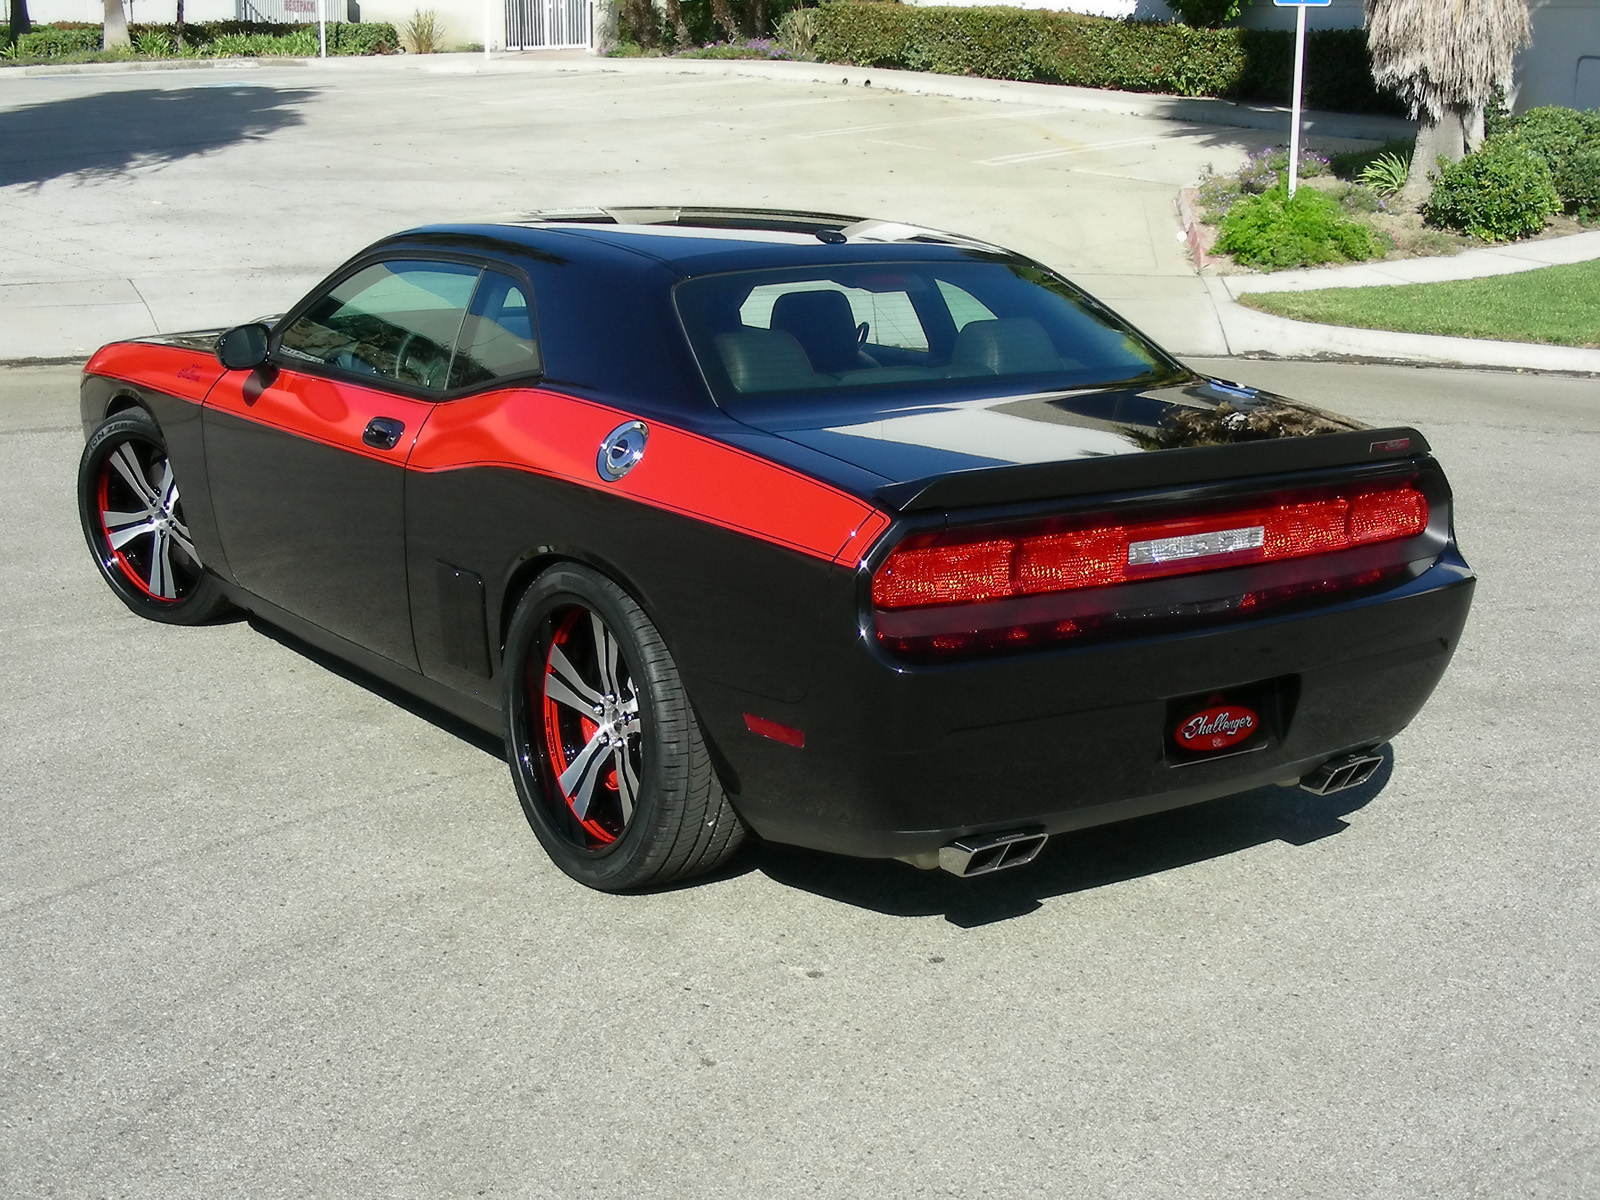 2009, Dodge, Challenger, Super, Muscle, Tuning, Hot, Rod, Rods Wallpaper